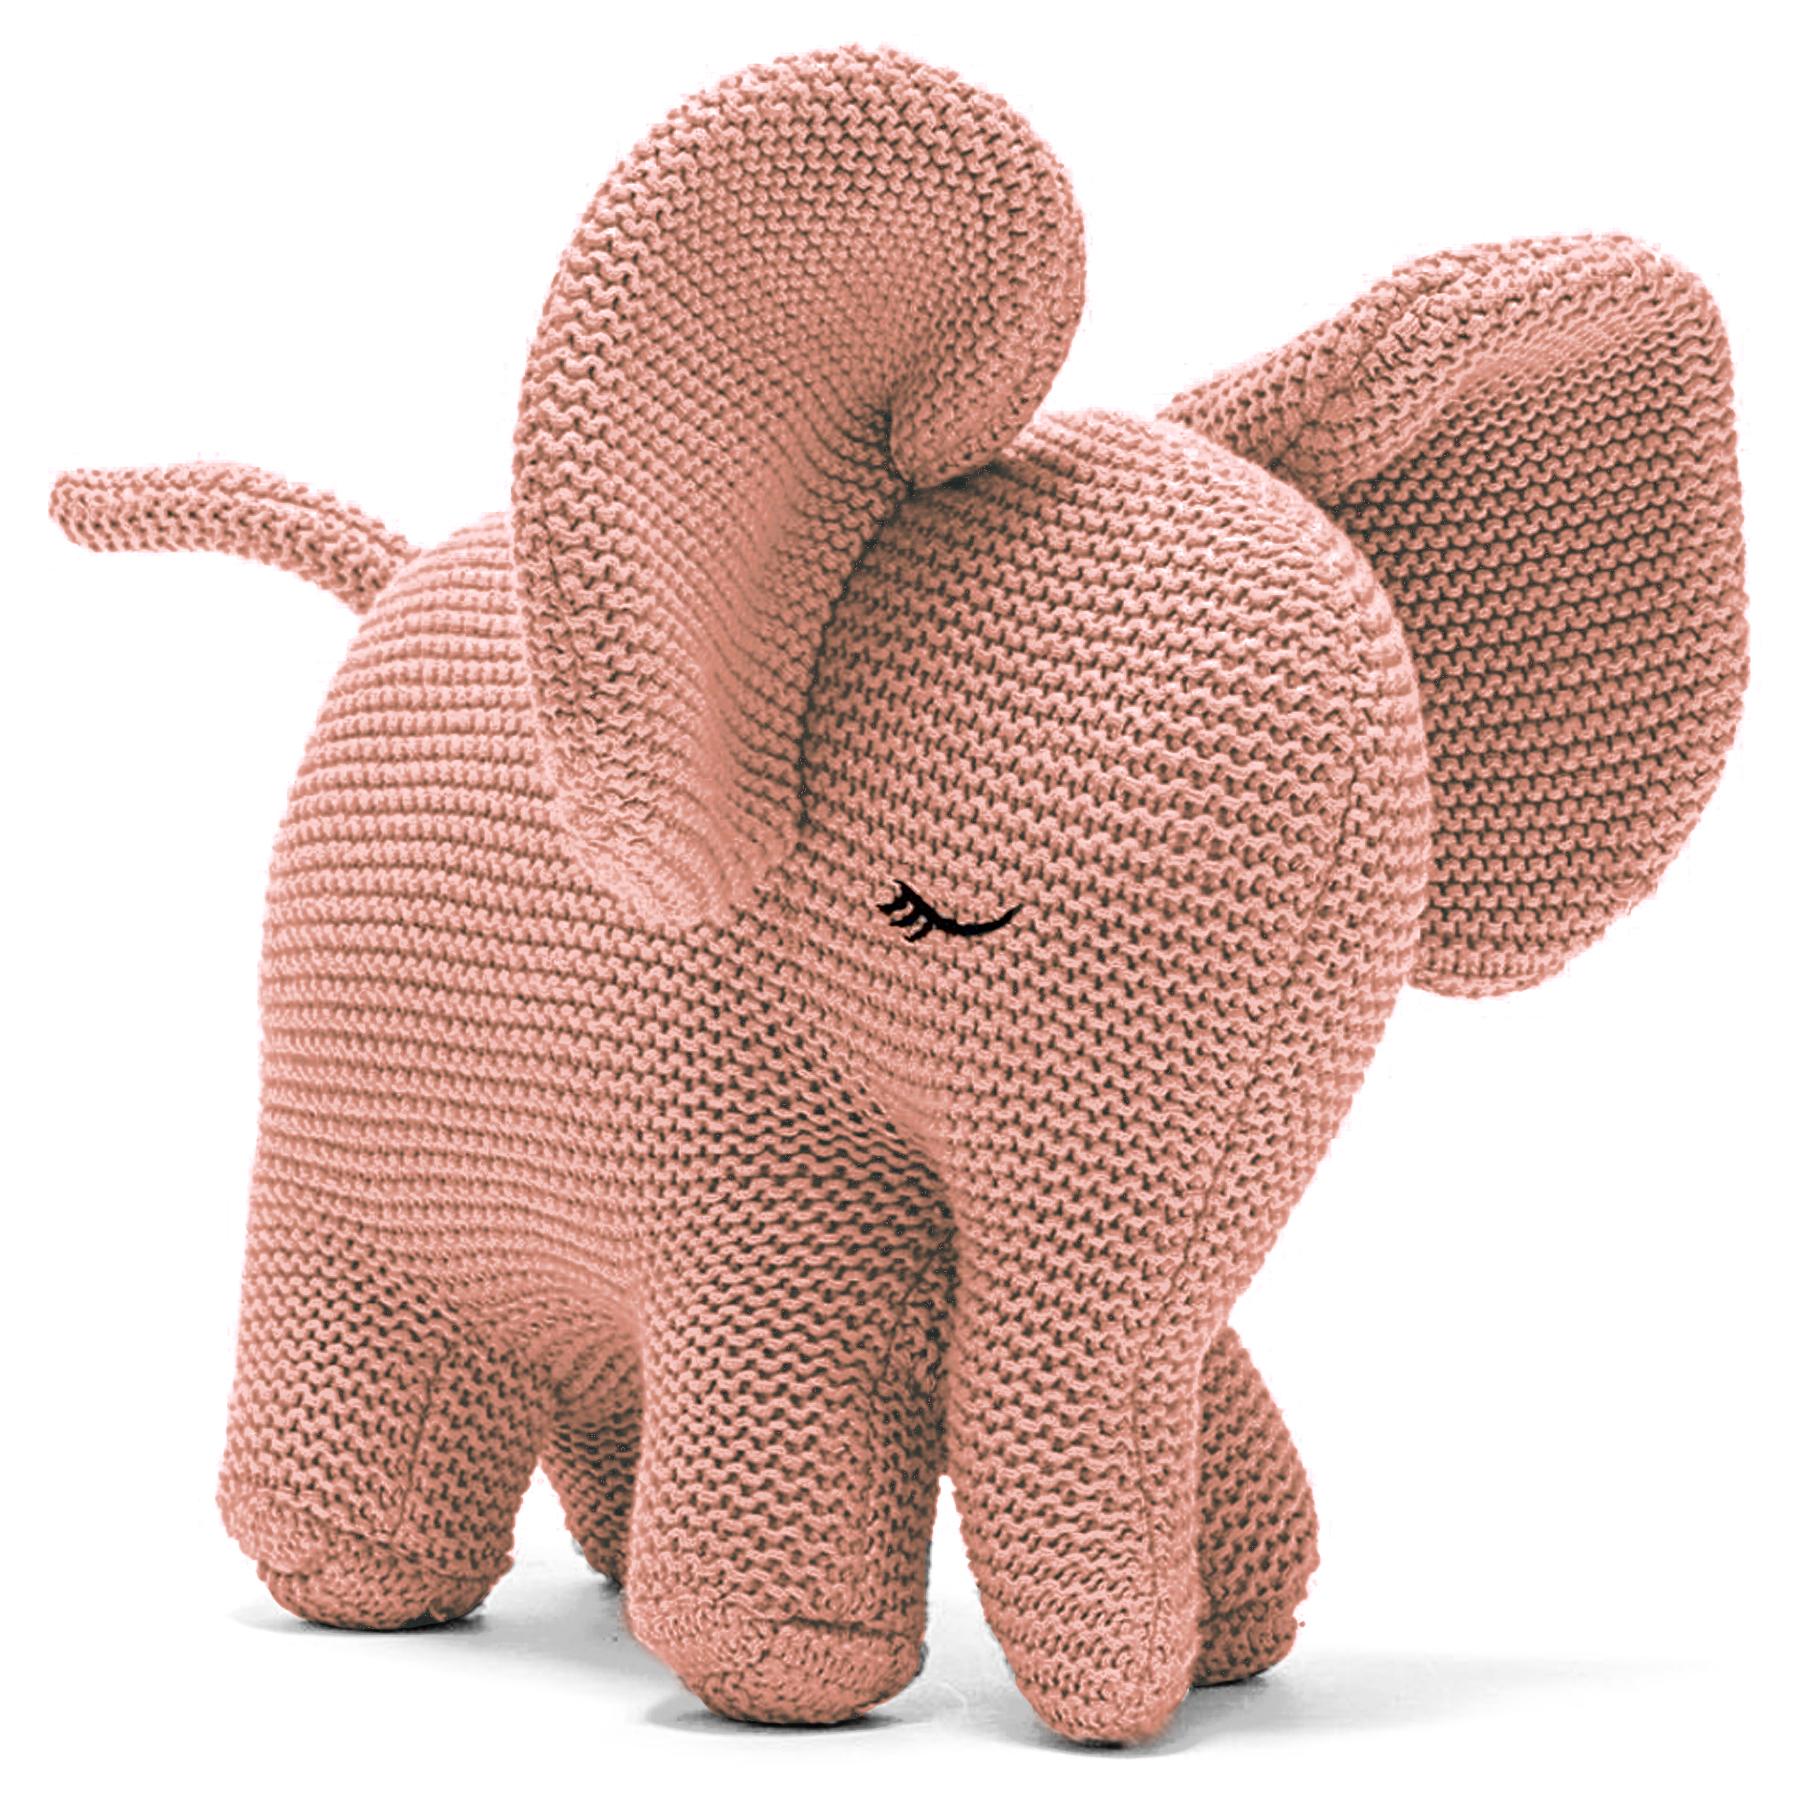 Best Years Charlotte Organic Dusky Pink Large Knitted Baby Elephant